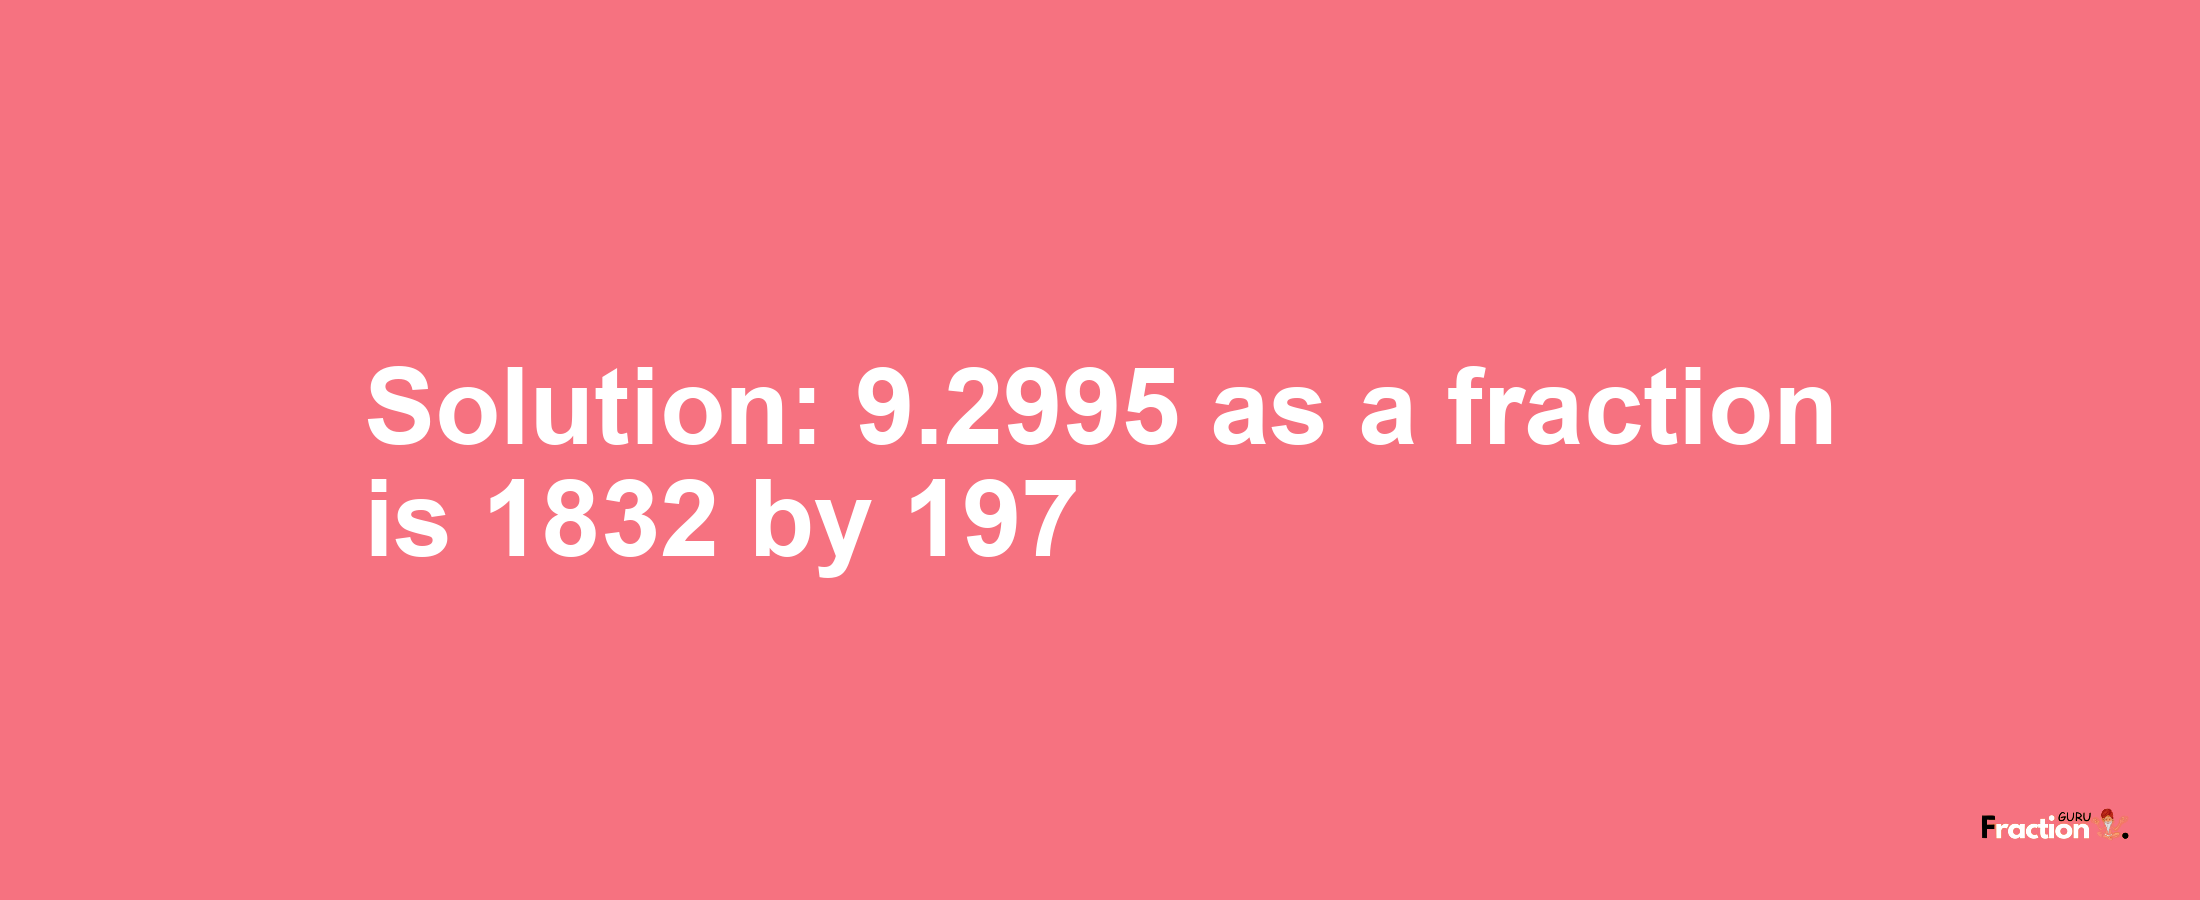 Solution:9.2995 as a fraction is 1832/197